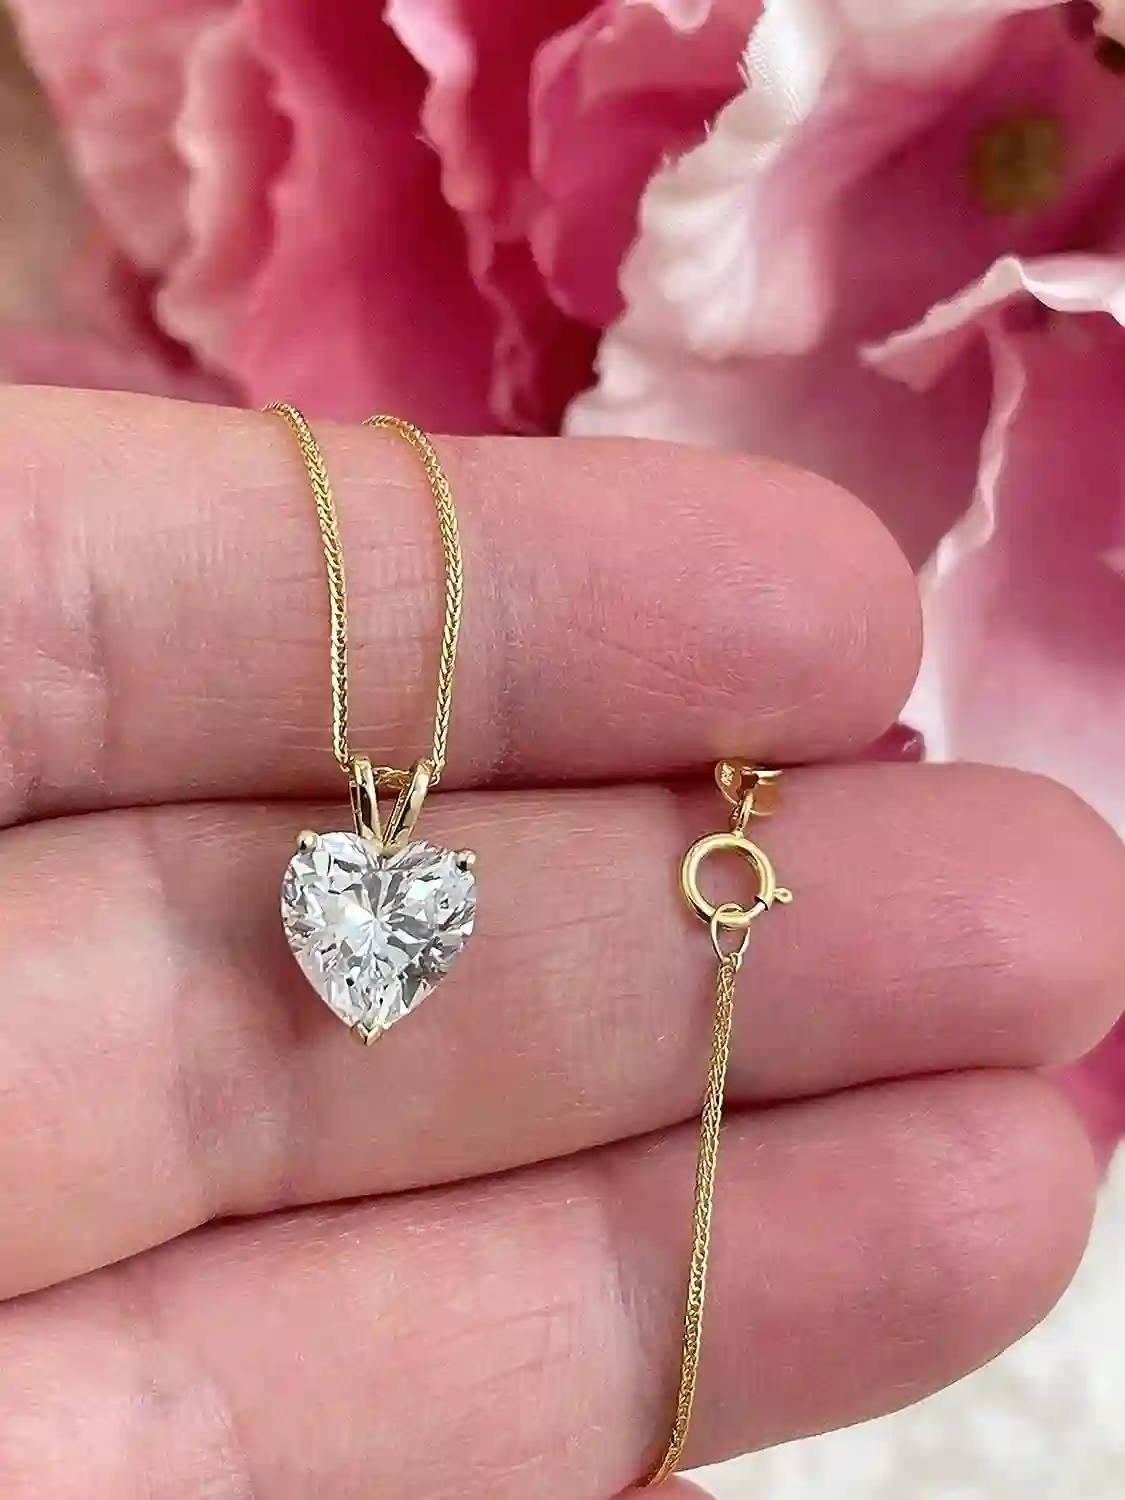 1.5 ctw Valentine's Day Diamond Heart Pendant Necklace SOLID 18k Yellow Gold Valentine Gift 18kt Solitaire Diamond Necklace Heart Jewelry 